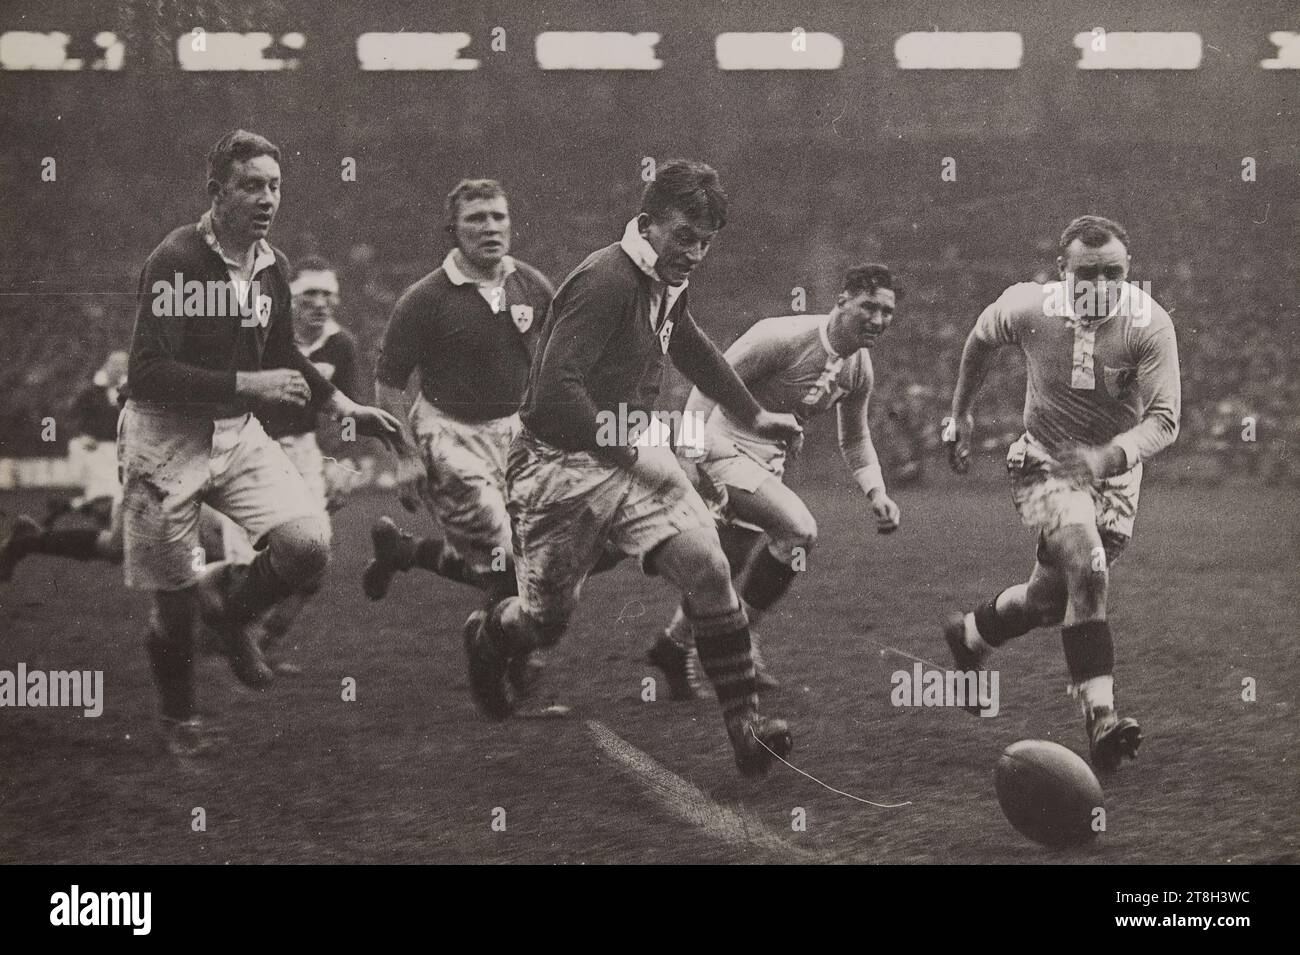 Rugby match between France and Ireland, Colombes stadium, Agence Rol G. Devred, Photographer, Array, Photography, Graphic arts, Photography, Gelatin silver bromide print, Dimensions - Work: Height: 12.1 cm, Width: 18 cm, Dimensions - Margin:, Height: 13 cm, Width: 18 cm Stock Photo